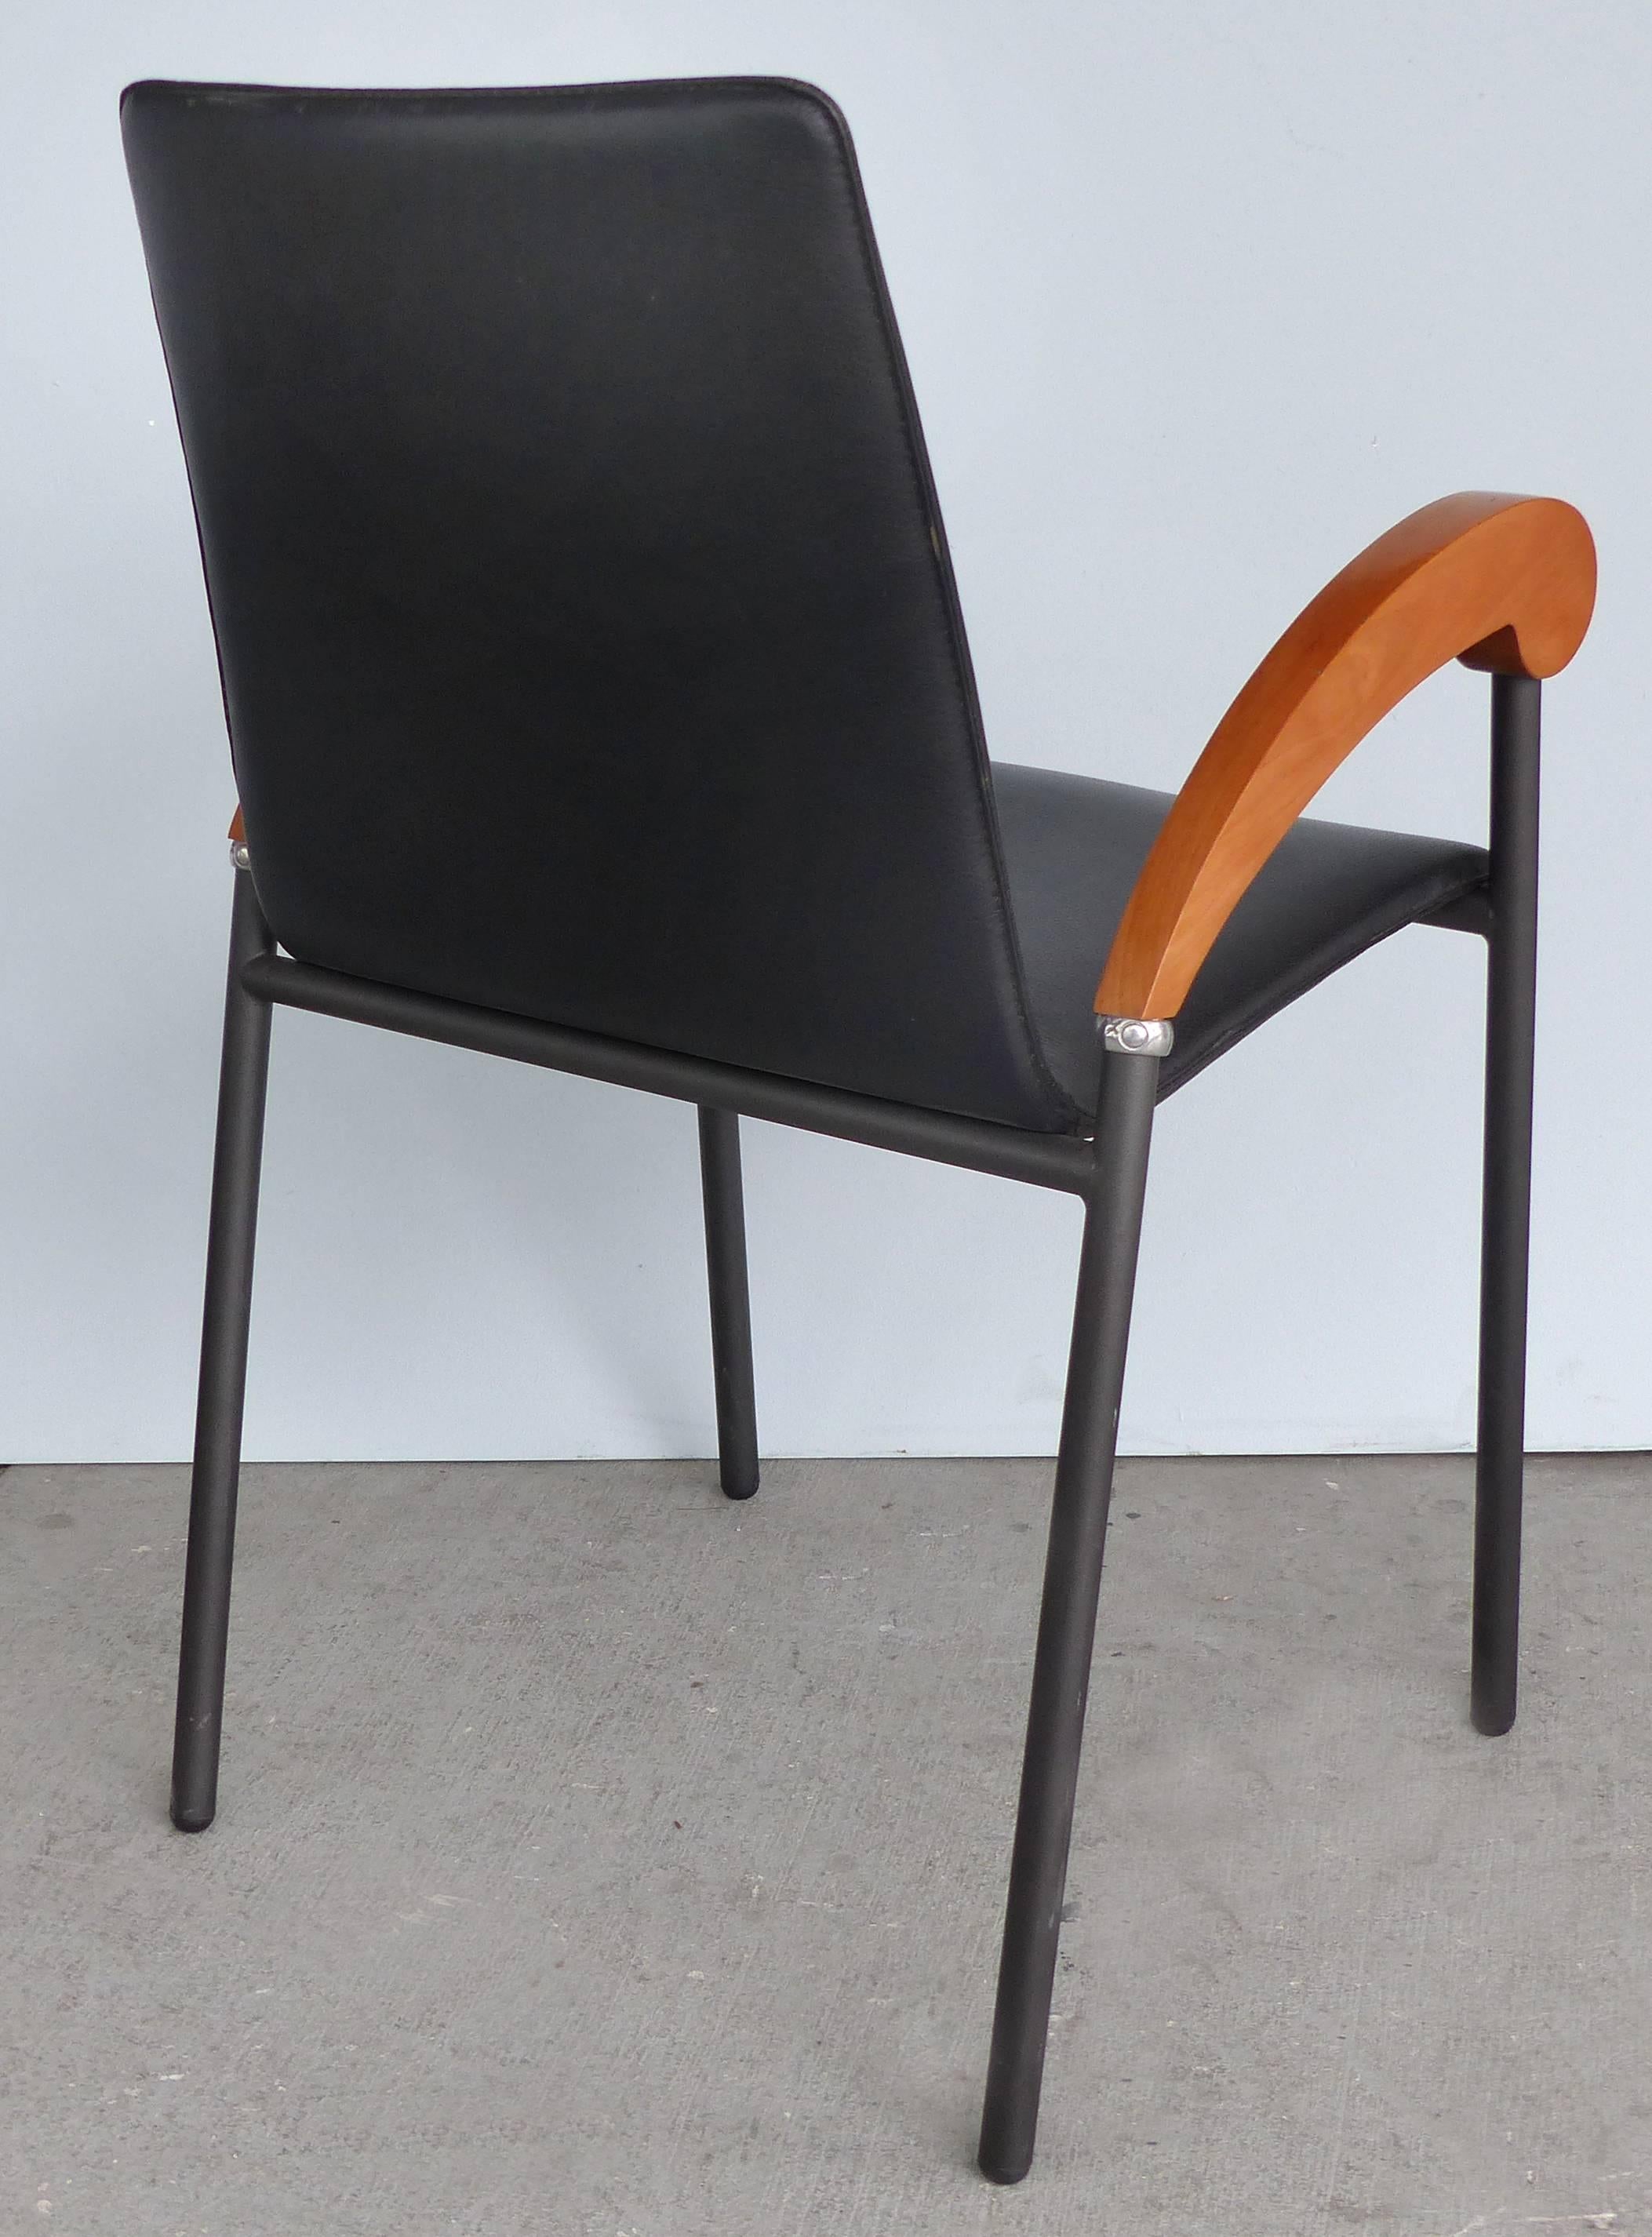 XO Design Metal and Wood Armchairs with Full Grain Leather Seats 

Offered for sale is a set of four modern armchairs marked XO at each curved lacquered wood arm. We attribute the design of these chairs to Phillipe Starck as the frames are so